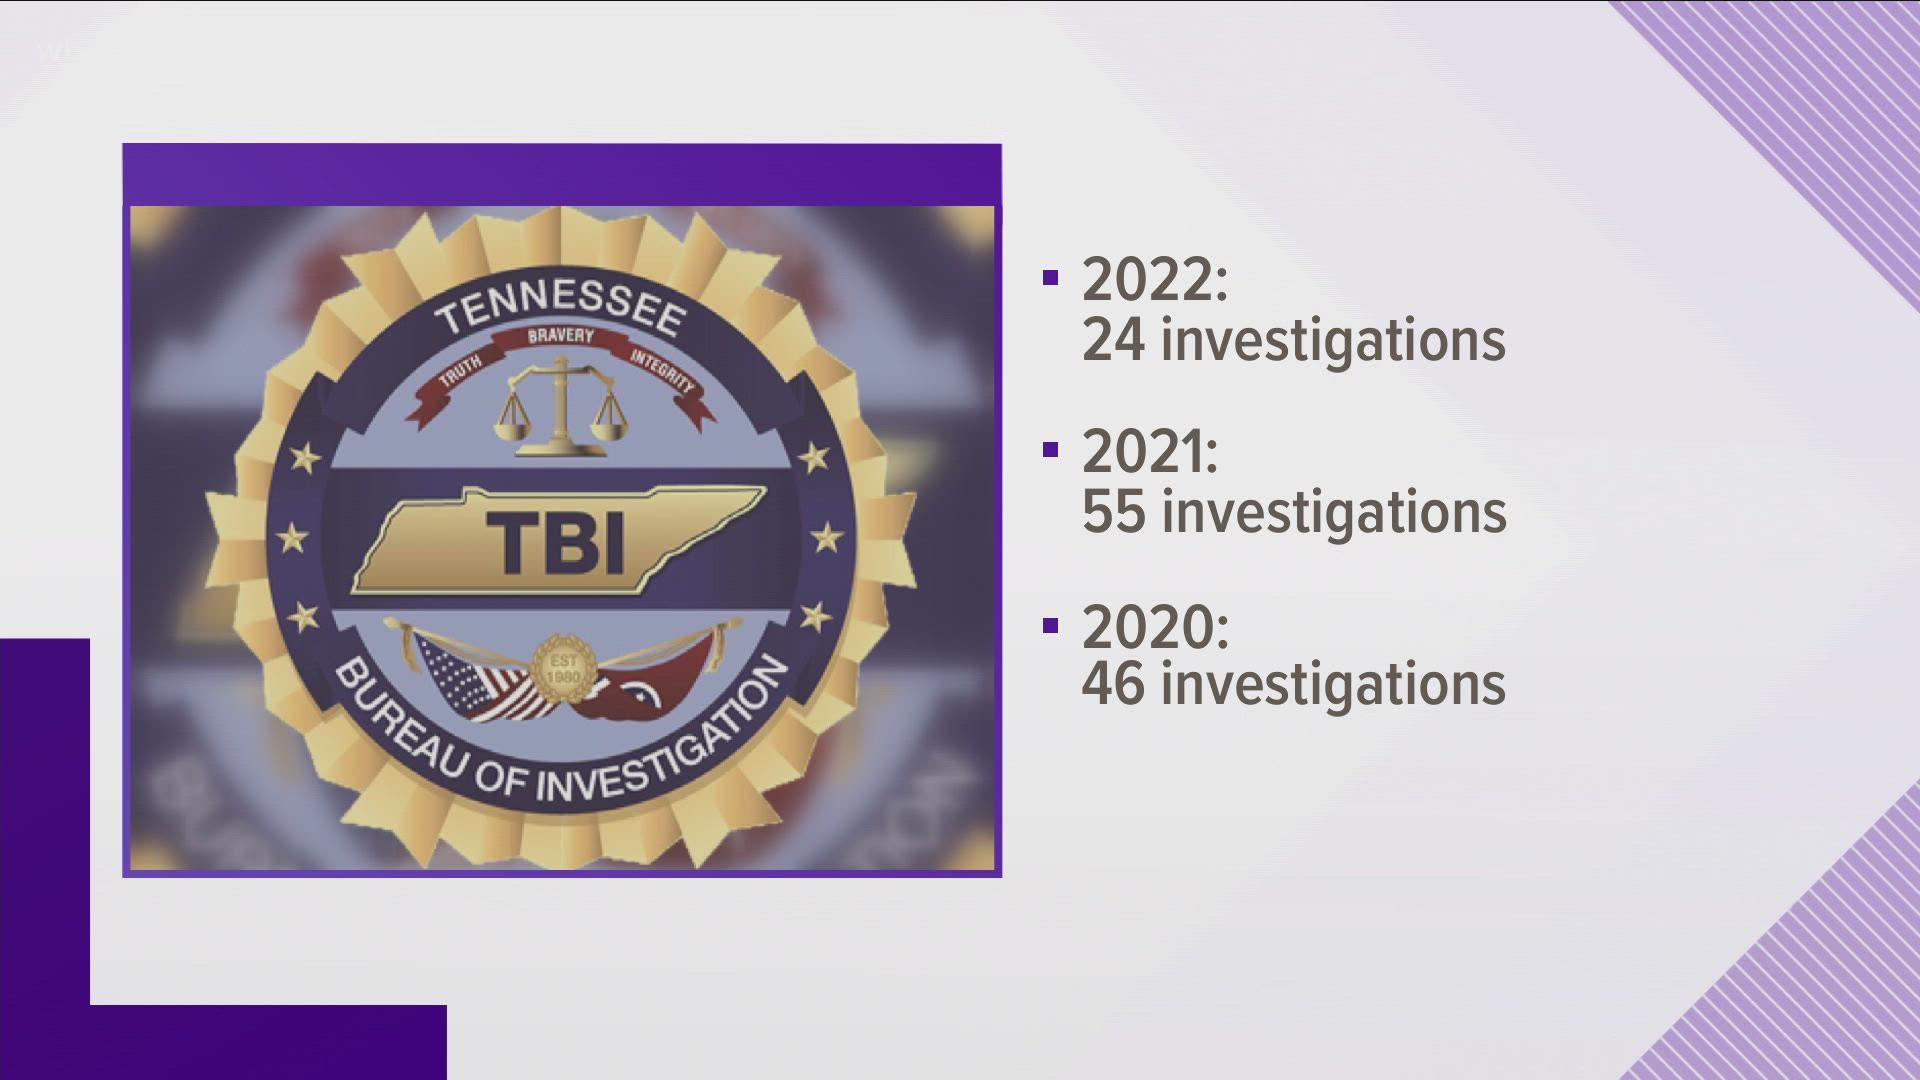 In 2021, the Tennessee Bureau of Investigation reported a total of 55 police shootings. That was up from the previous year.